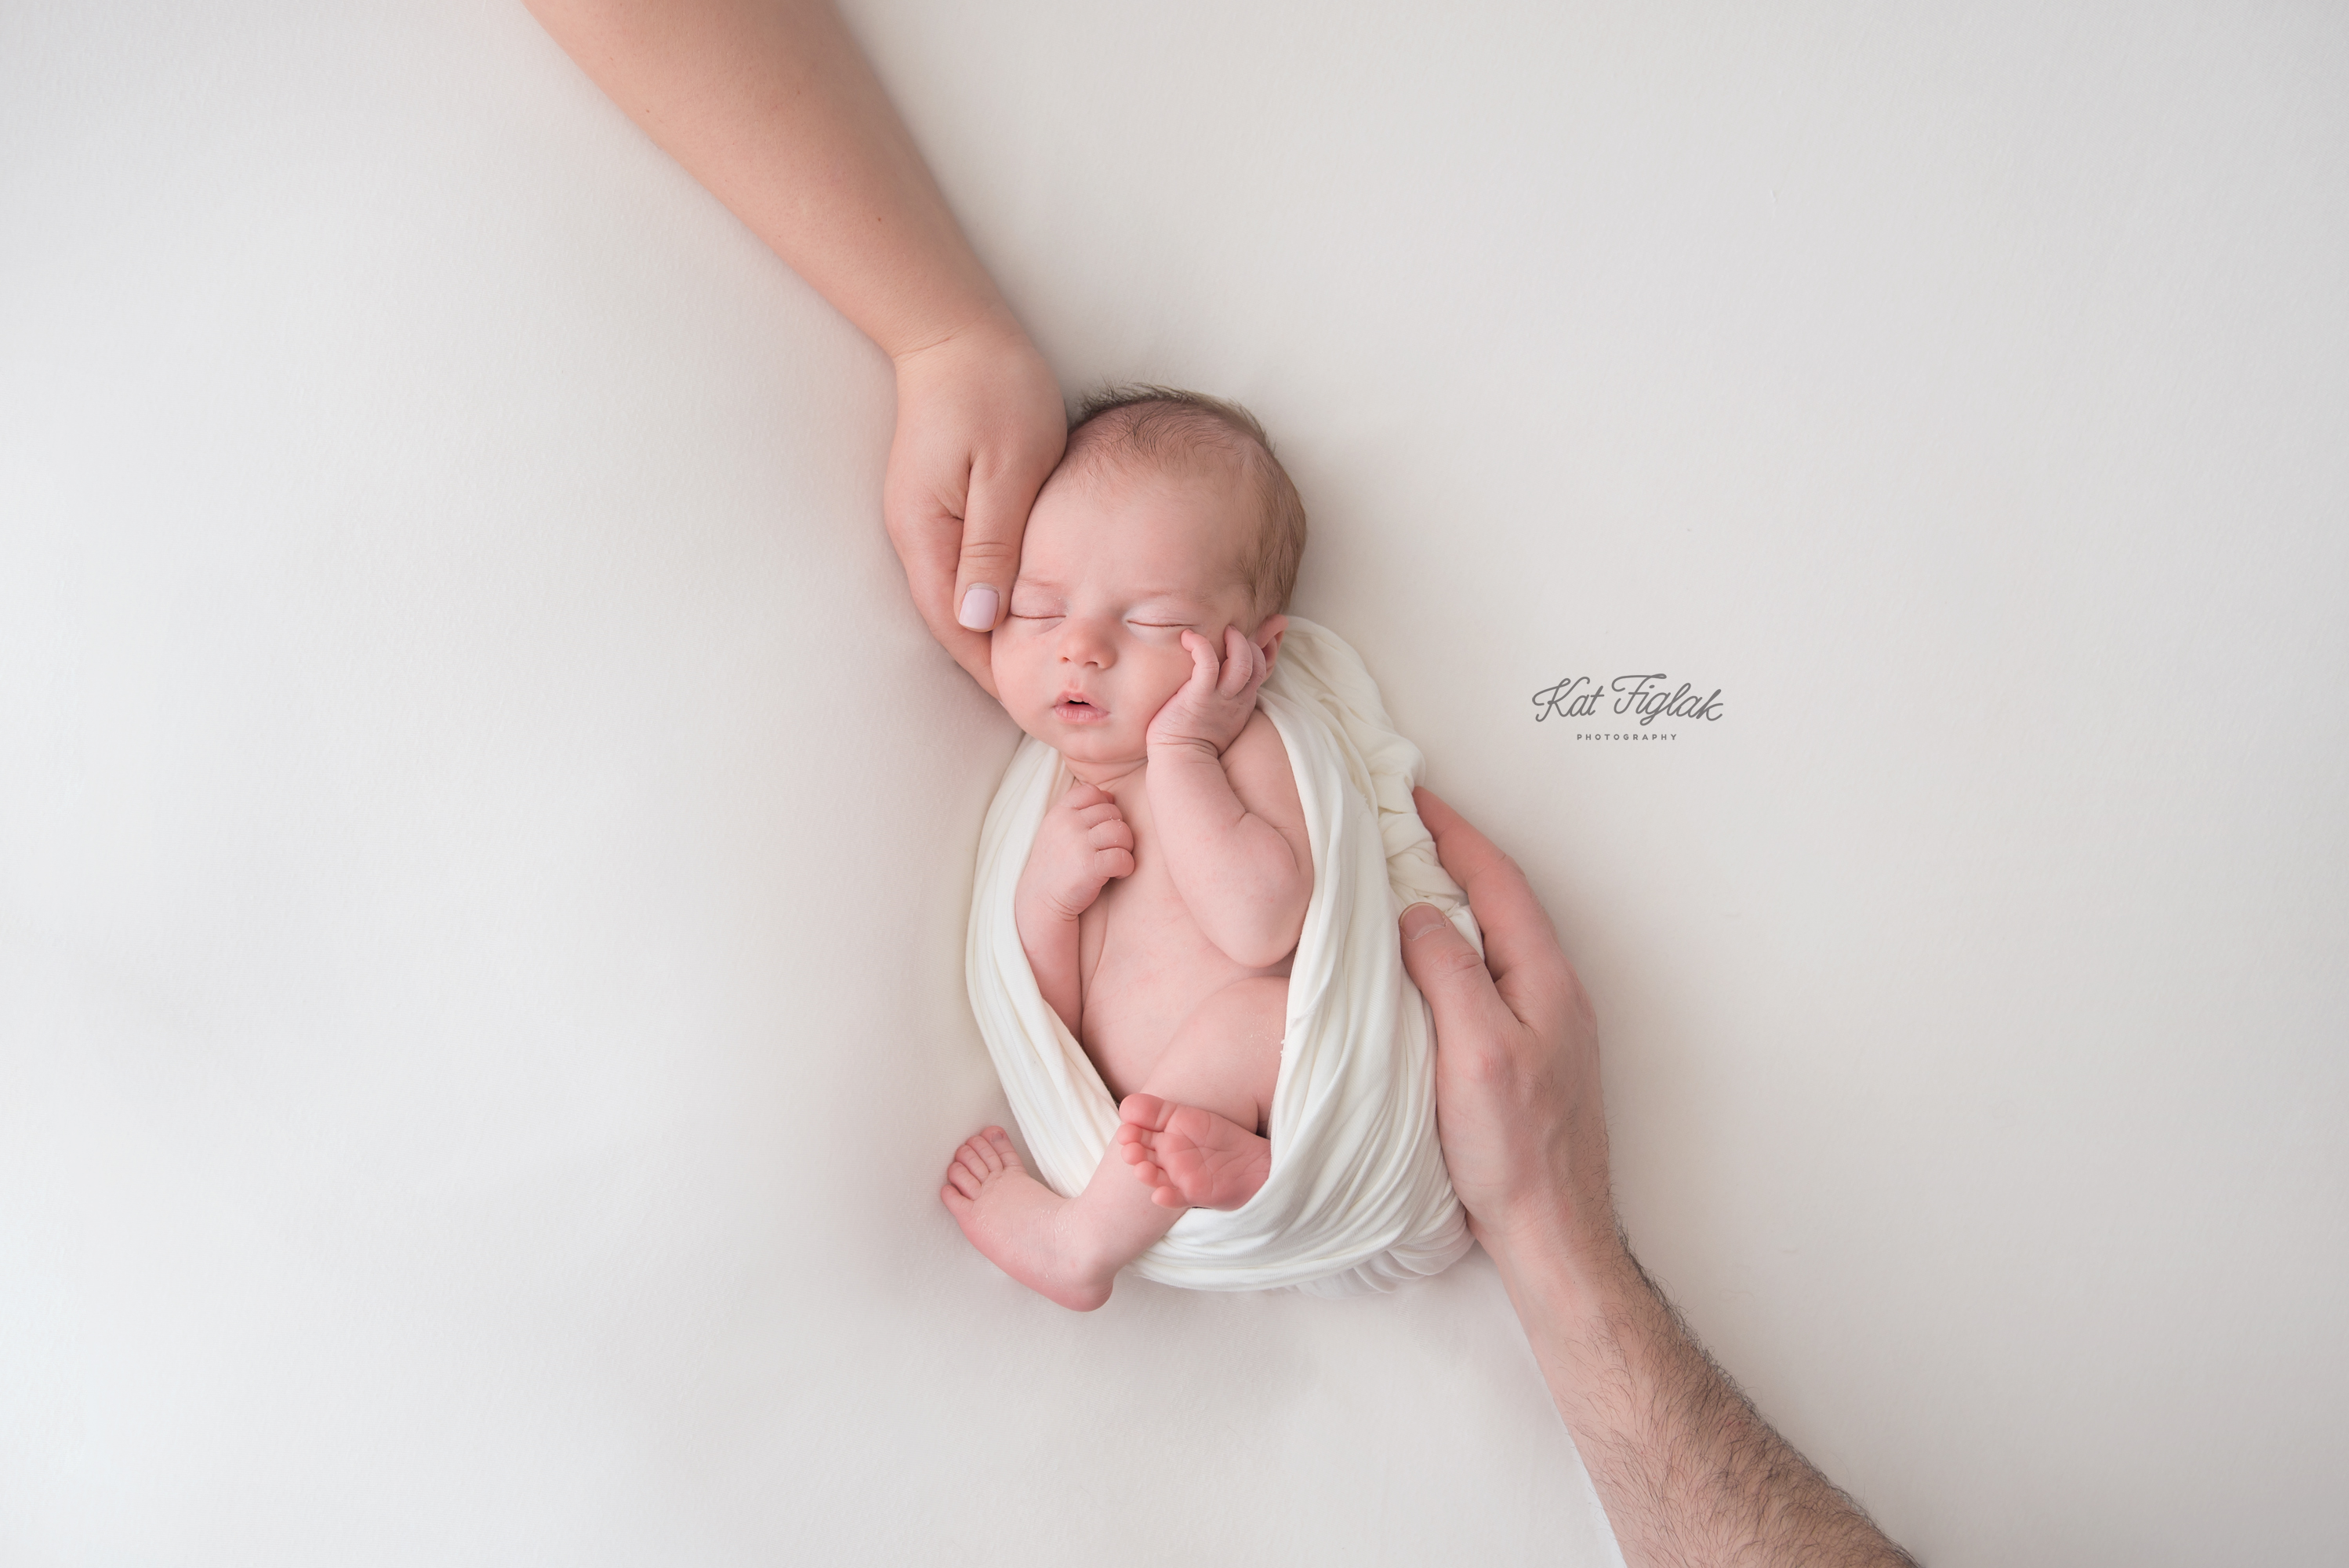 newborn baby boy sleeping on white blanket with both parents hands resting on him